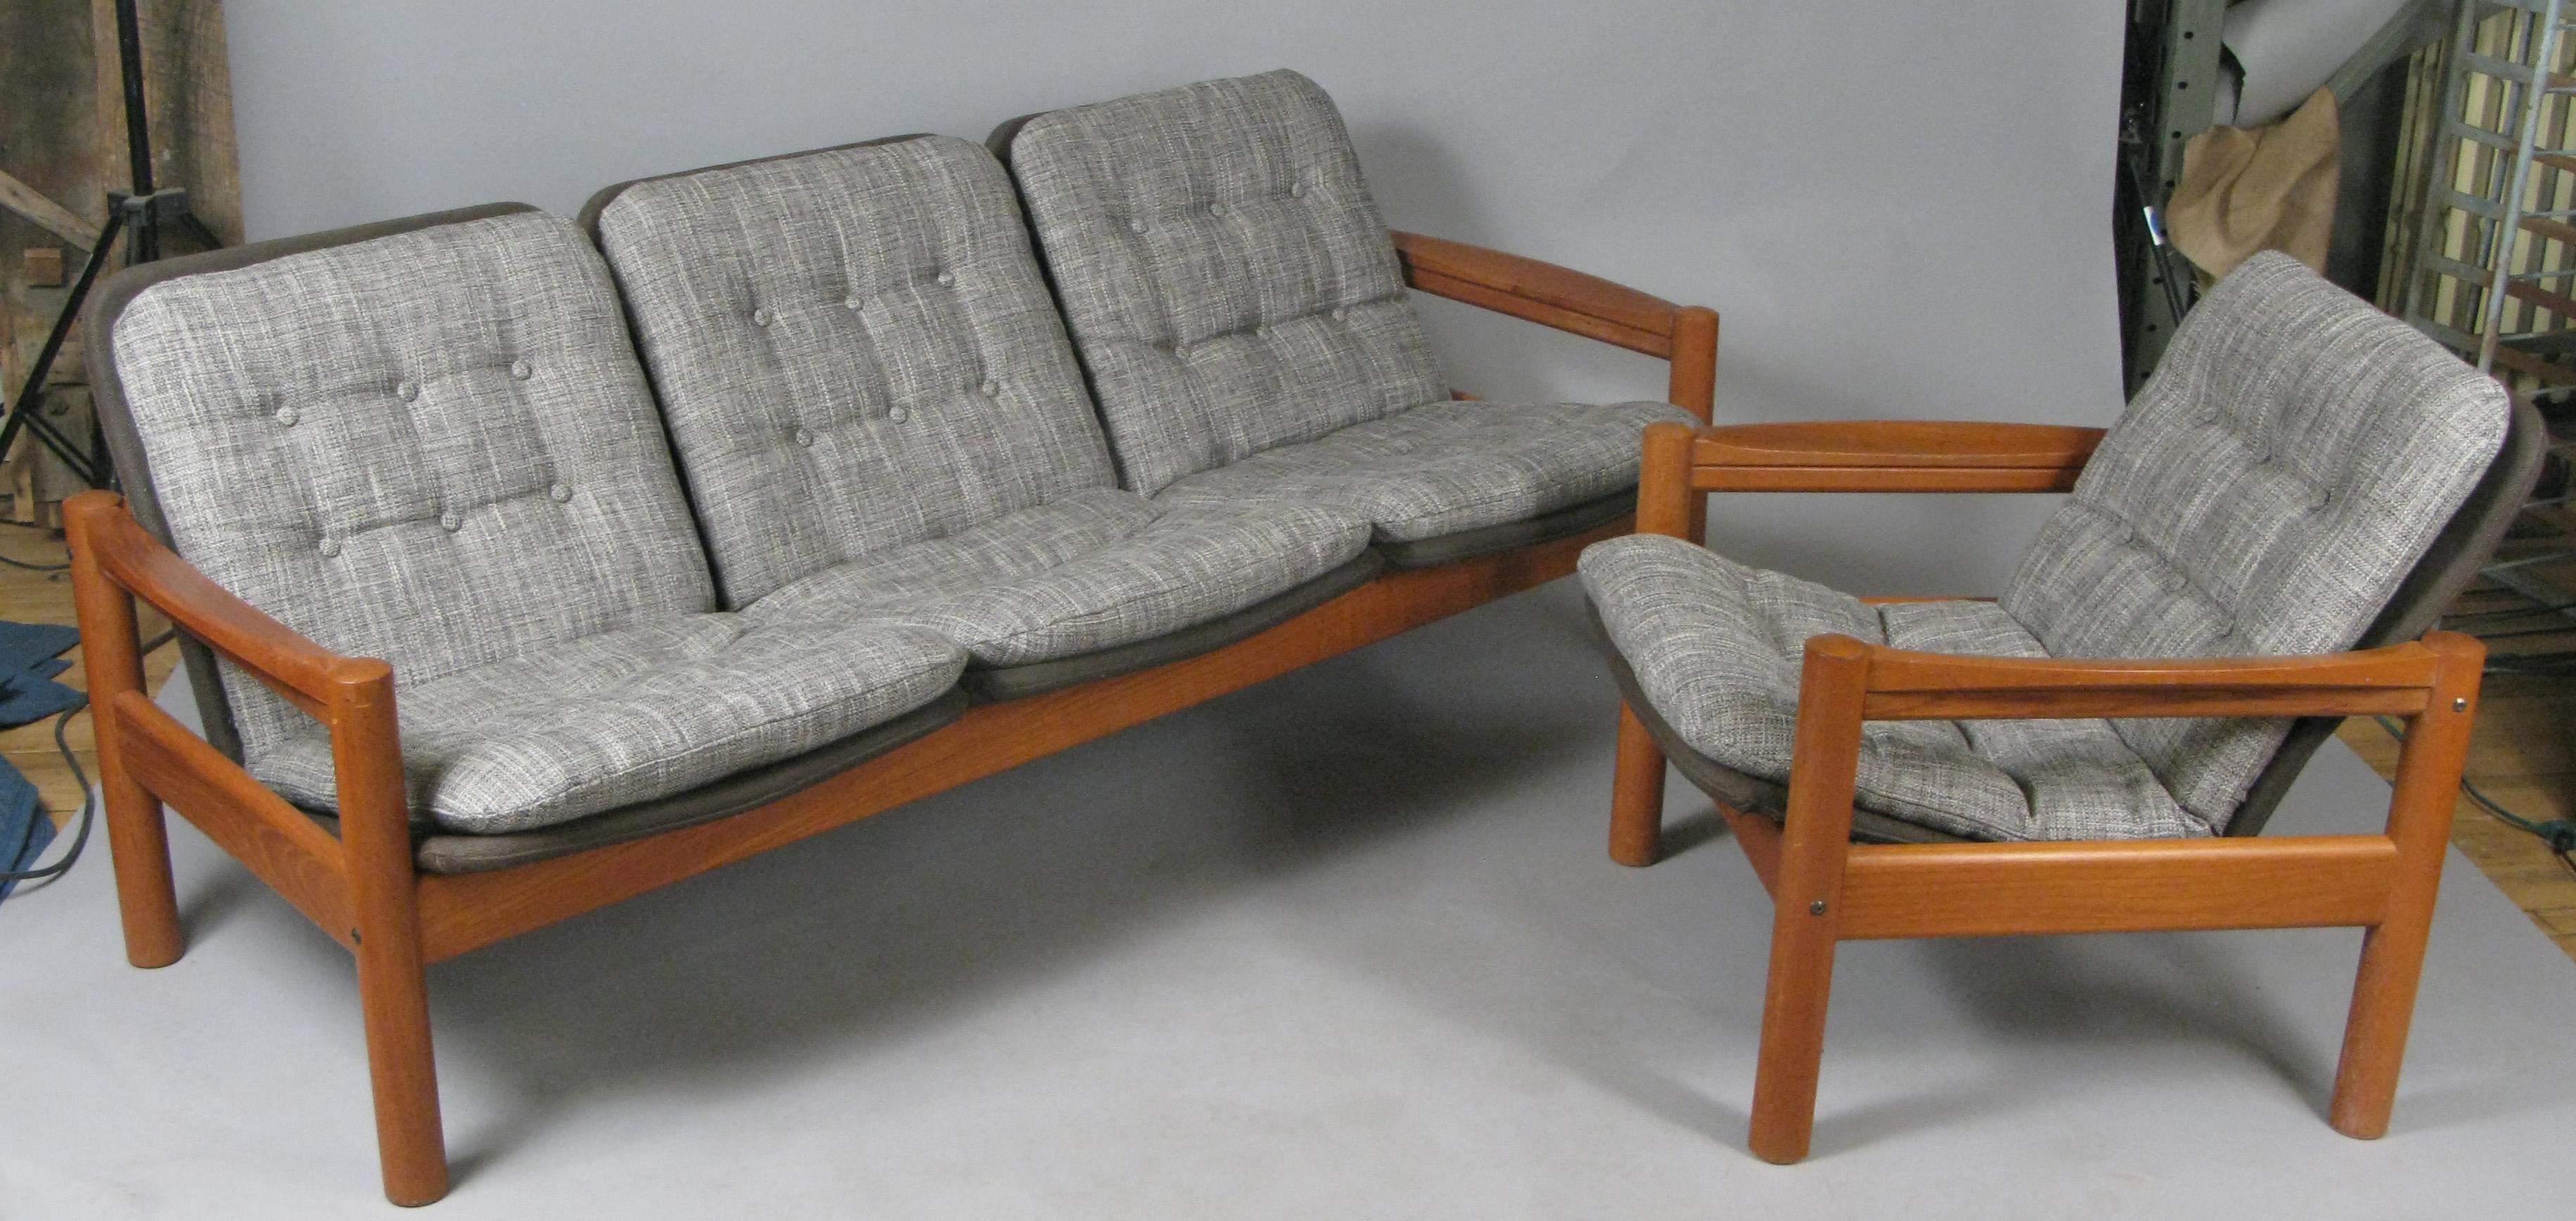 1970s Danish Teak Lounge Chair by Domino Møbler 1